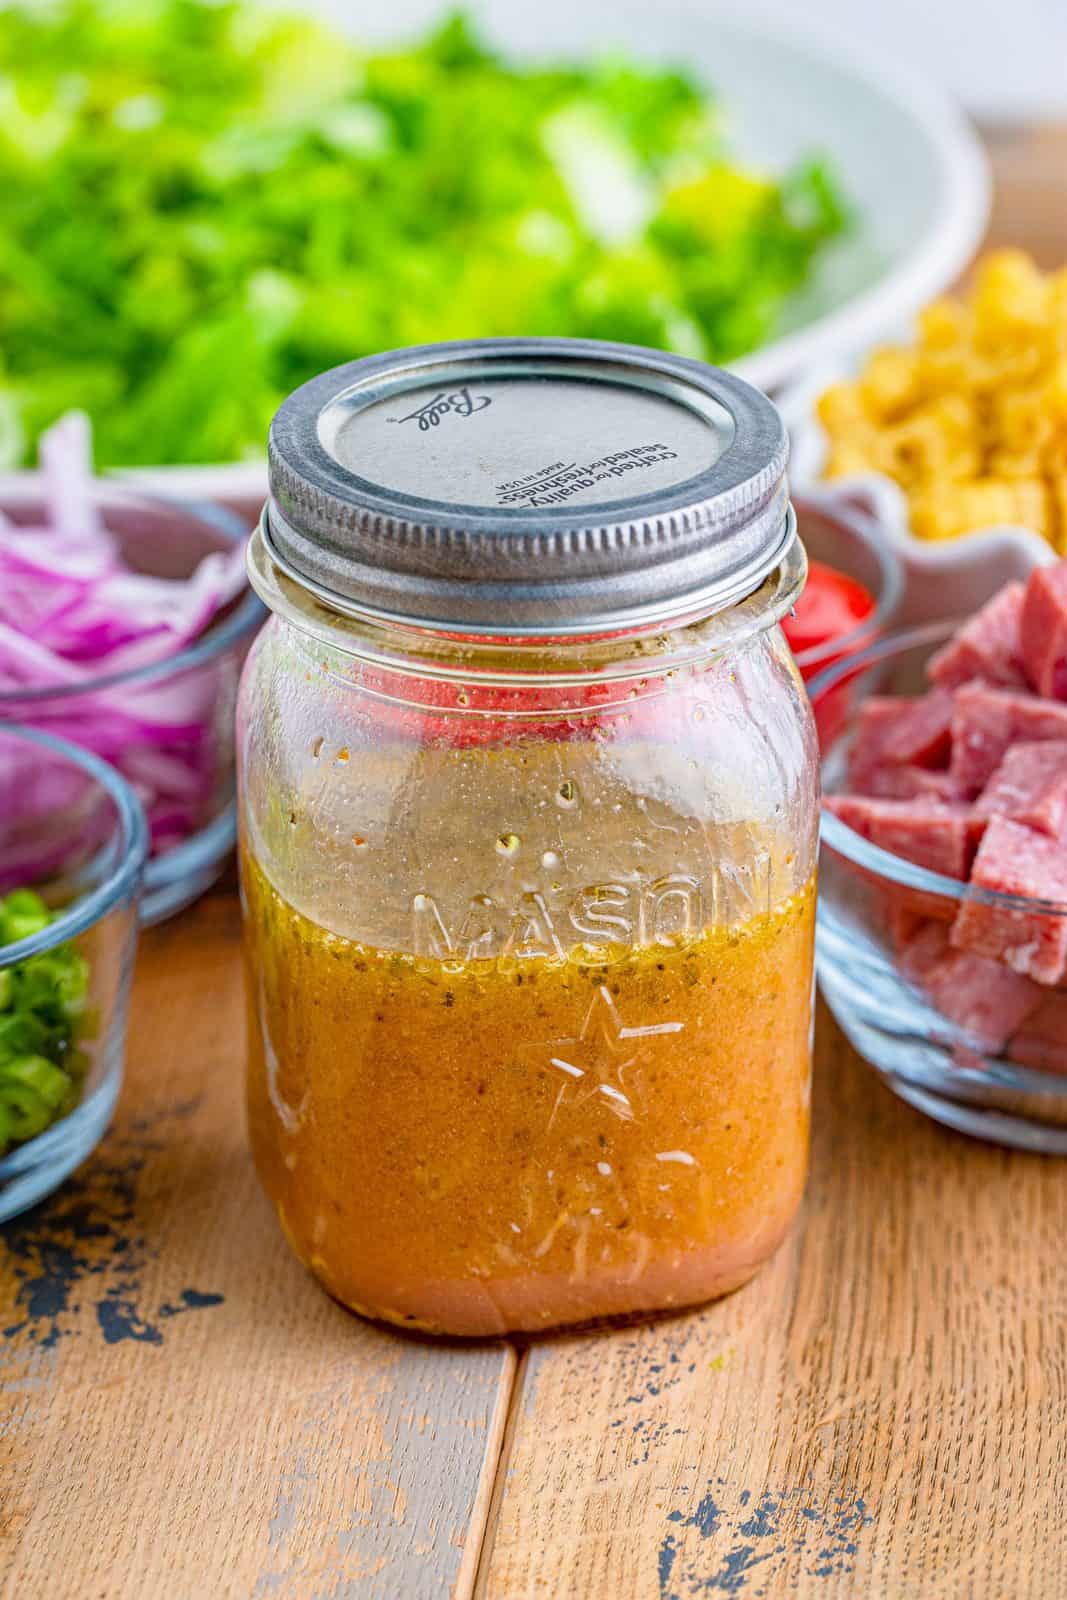 prepared salad dressing shown completely combined in a mason jar.